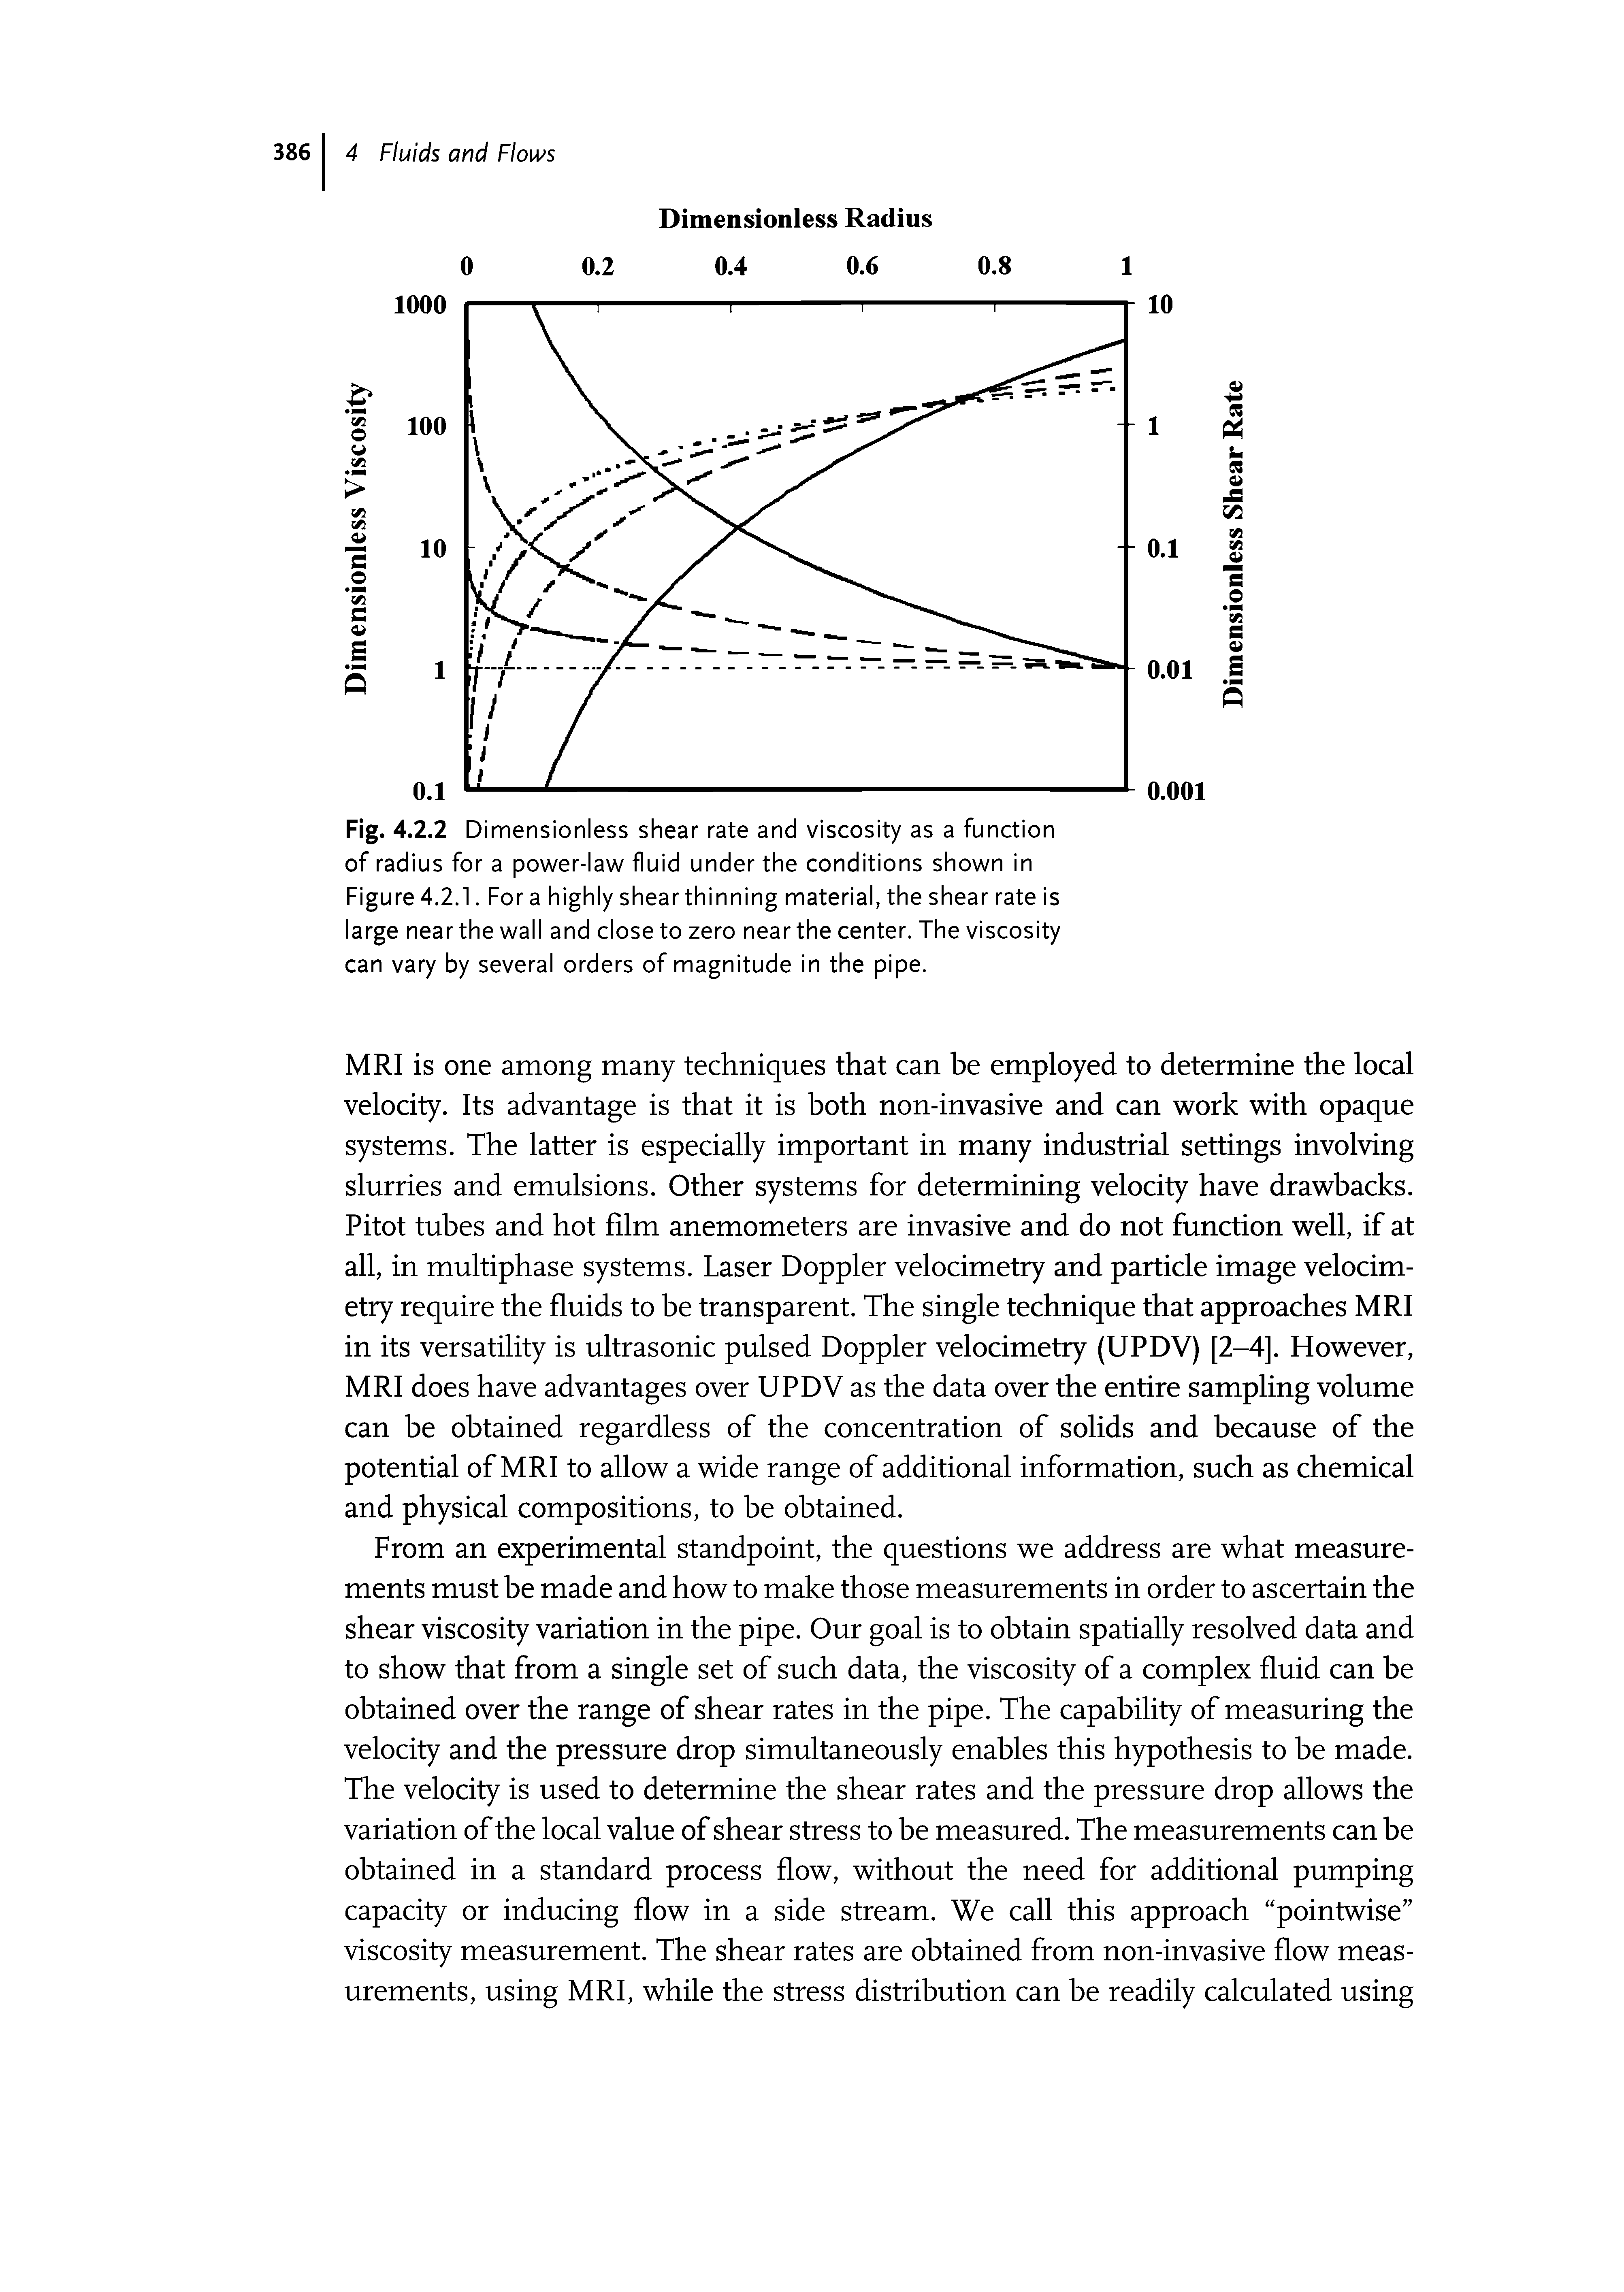 Fig. 4.2.2 Dimensionless shear rate and viscosity as a function of radius for a power-law fluid under the conditions shown in Figure 4.2.1. For a highly shear thinning material, the shear rate is large near the wall and close to zero near the center. The viscosity can vary by several orders of magnitude in the pipe.